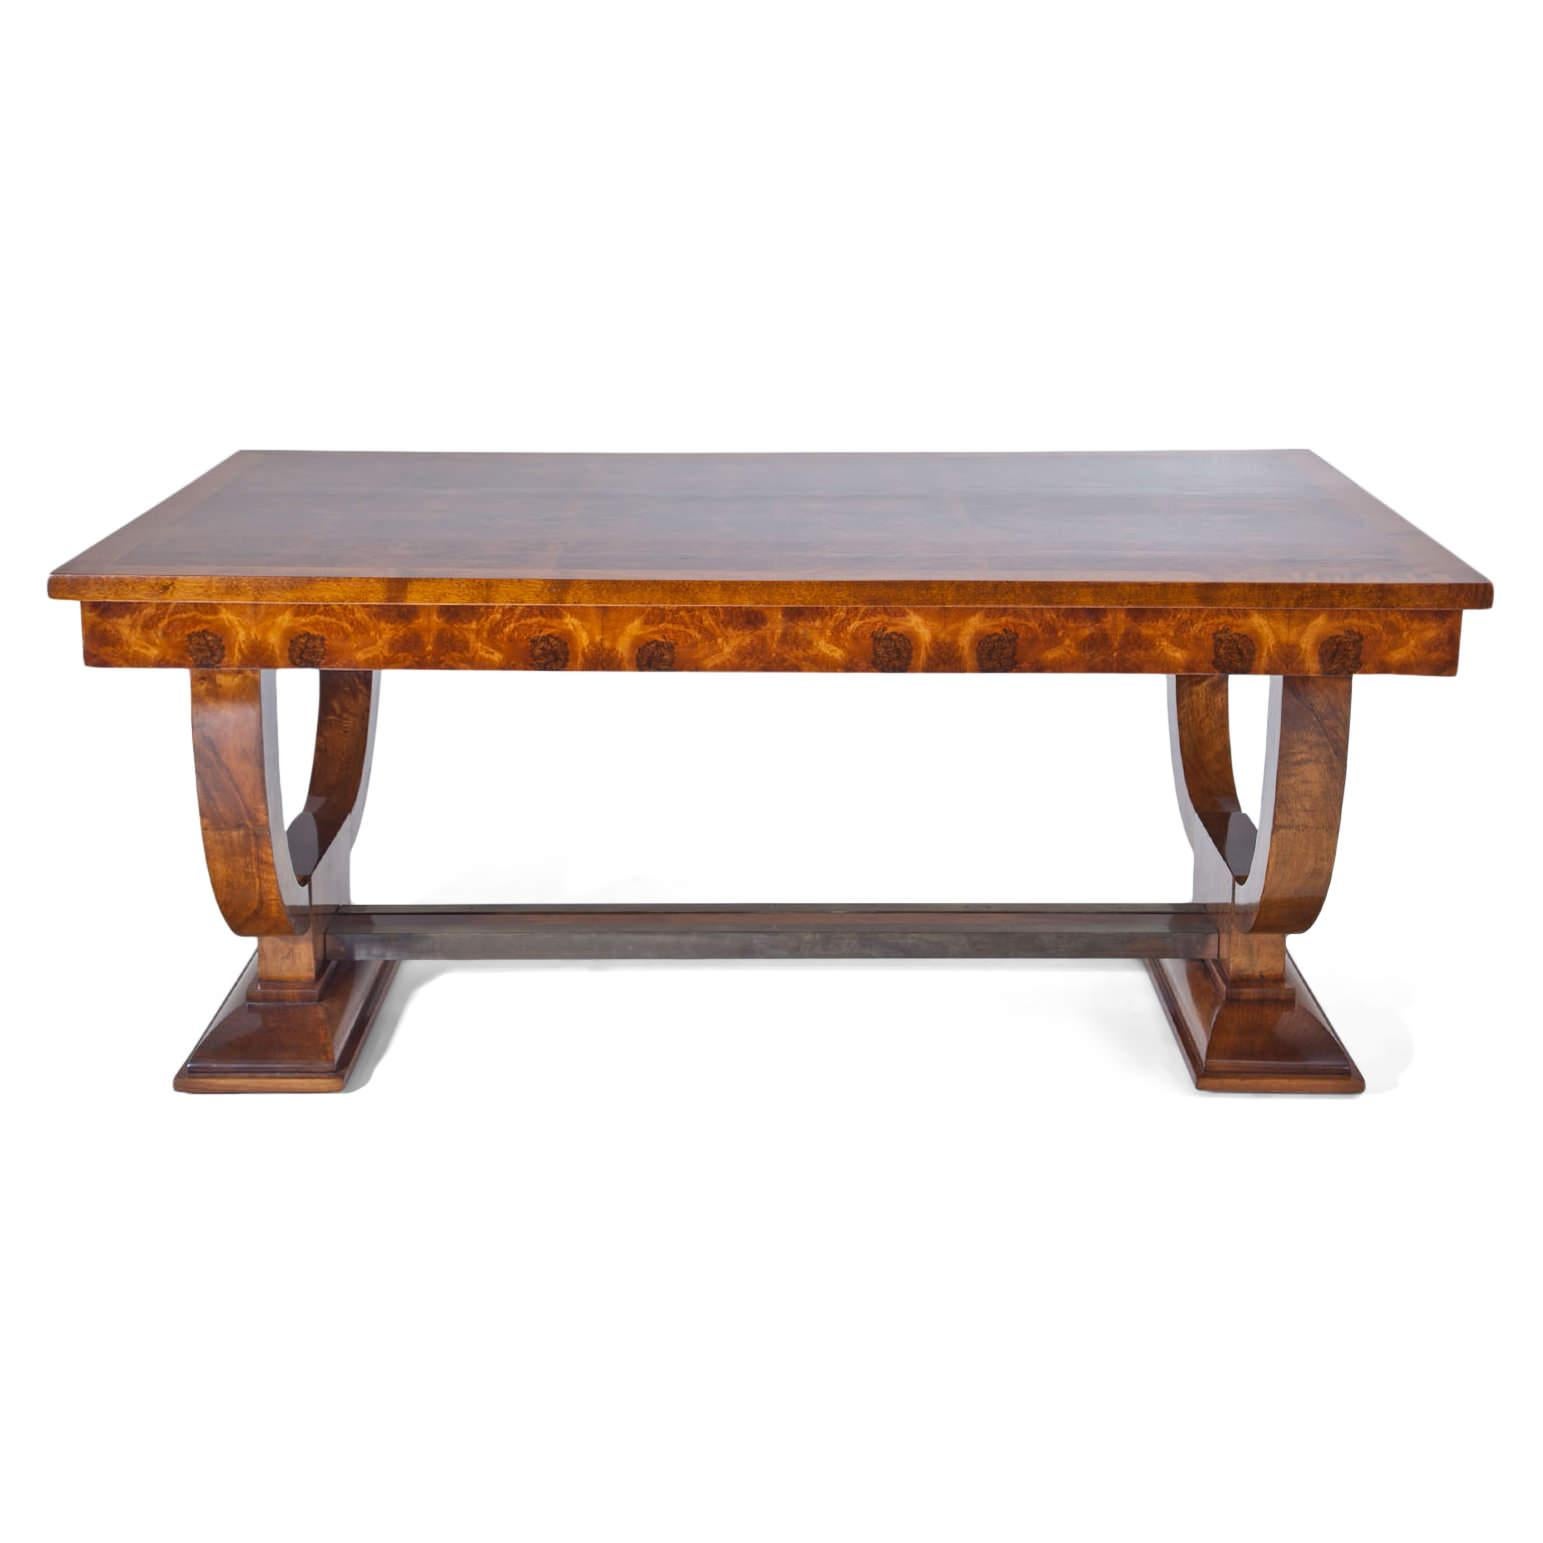 Large dining room table with eight fitting chairs of the Art Deco. The table with burl wood veneer and u-shaped legs and a metal-reinforced strutting. The table can be extended on both sides. The chairs show mirrored burl wood veneer on the